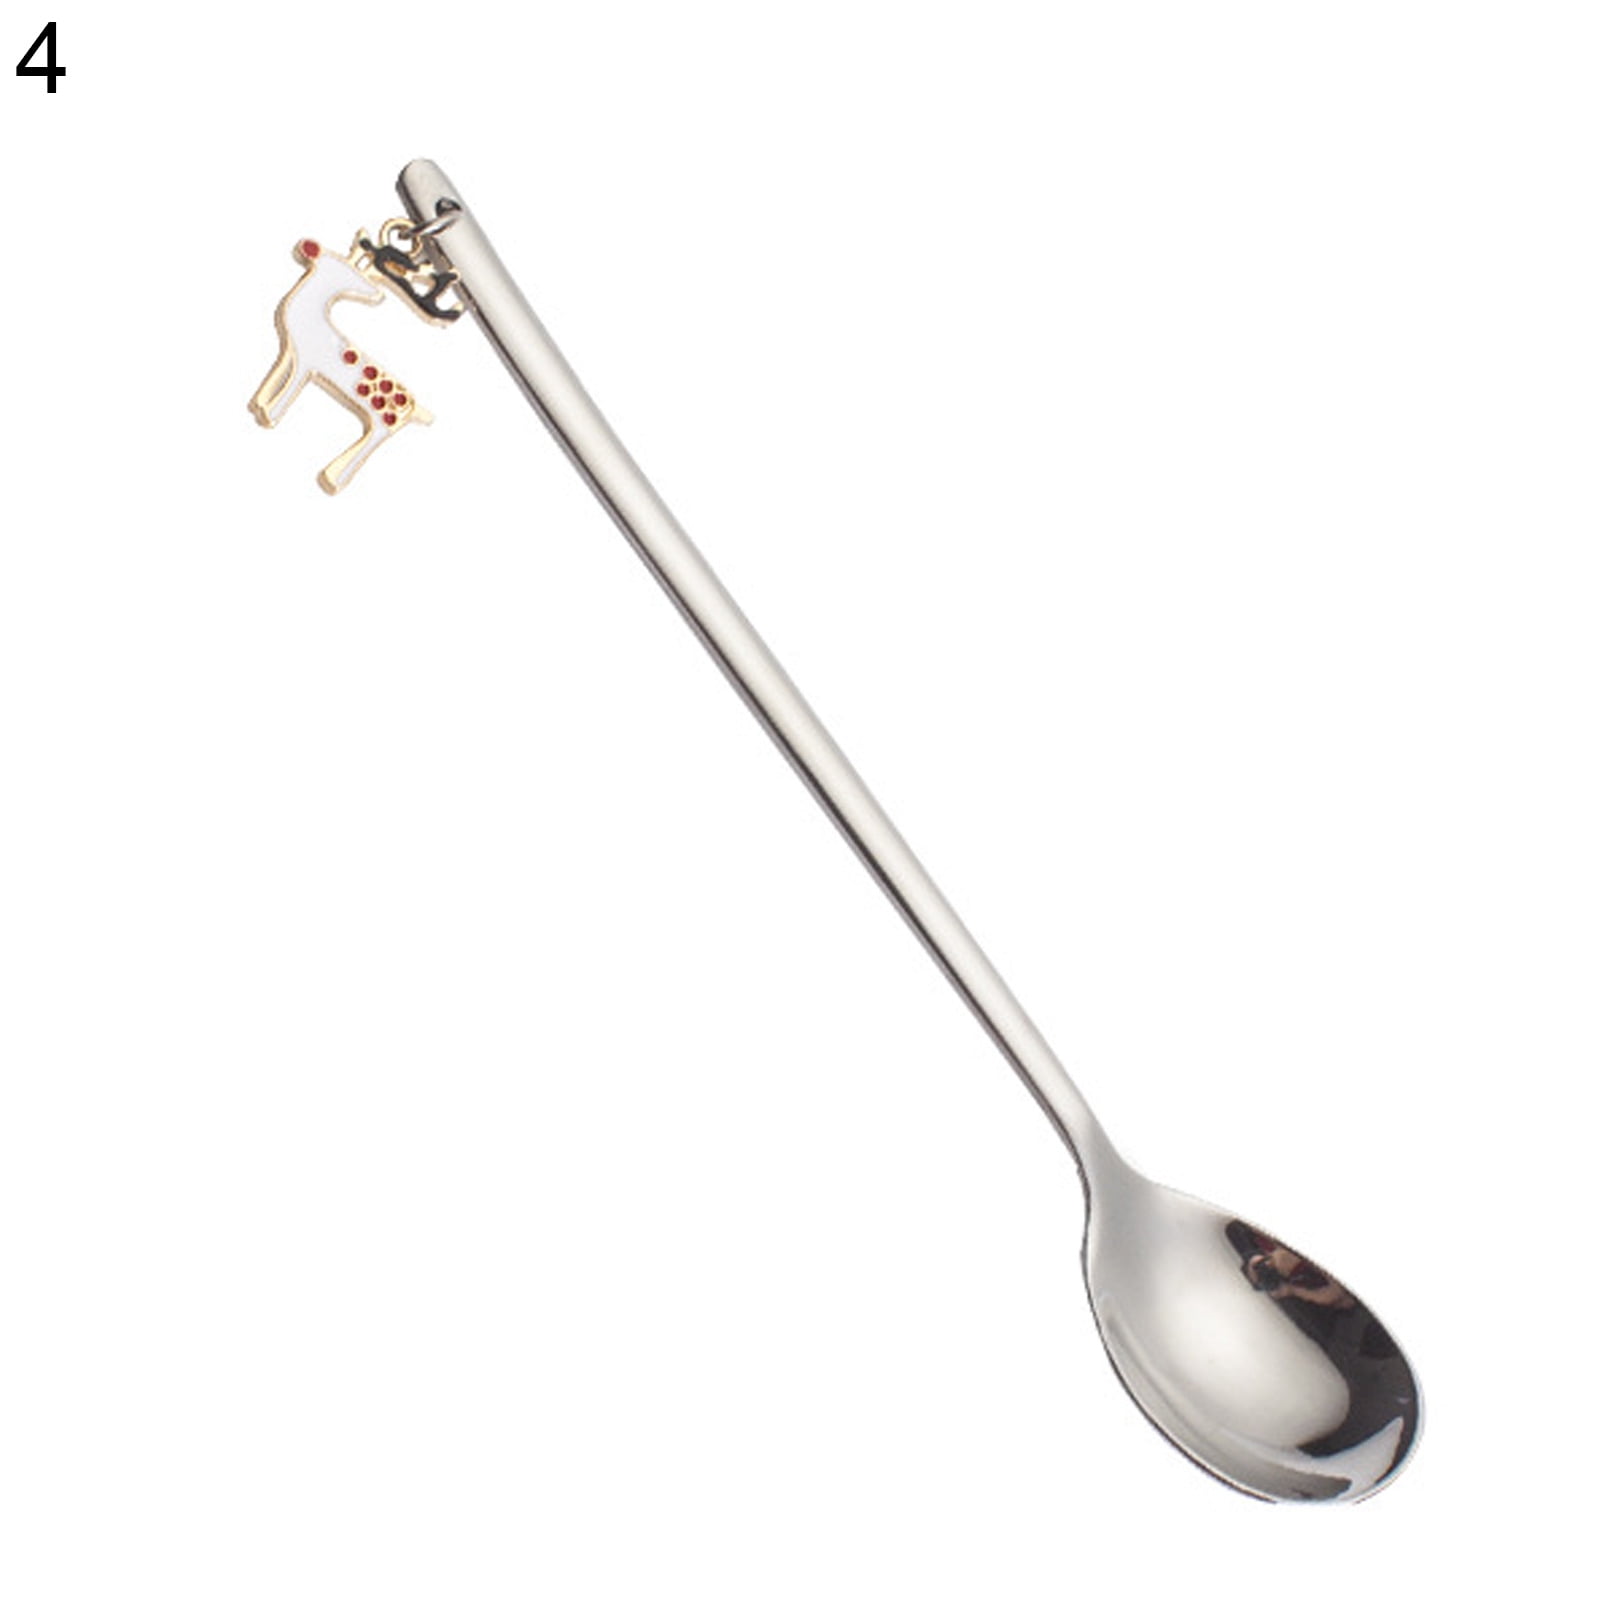 uxcell Stainless Steel Kitchen Tea Sugar Salt Serving Spoon 13.5cm Length Silver Tone 